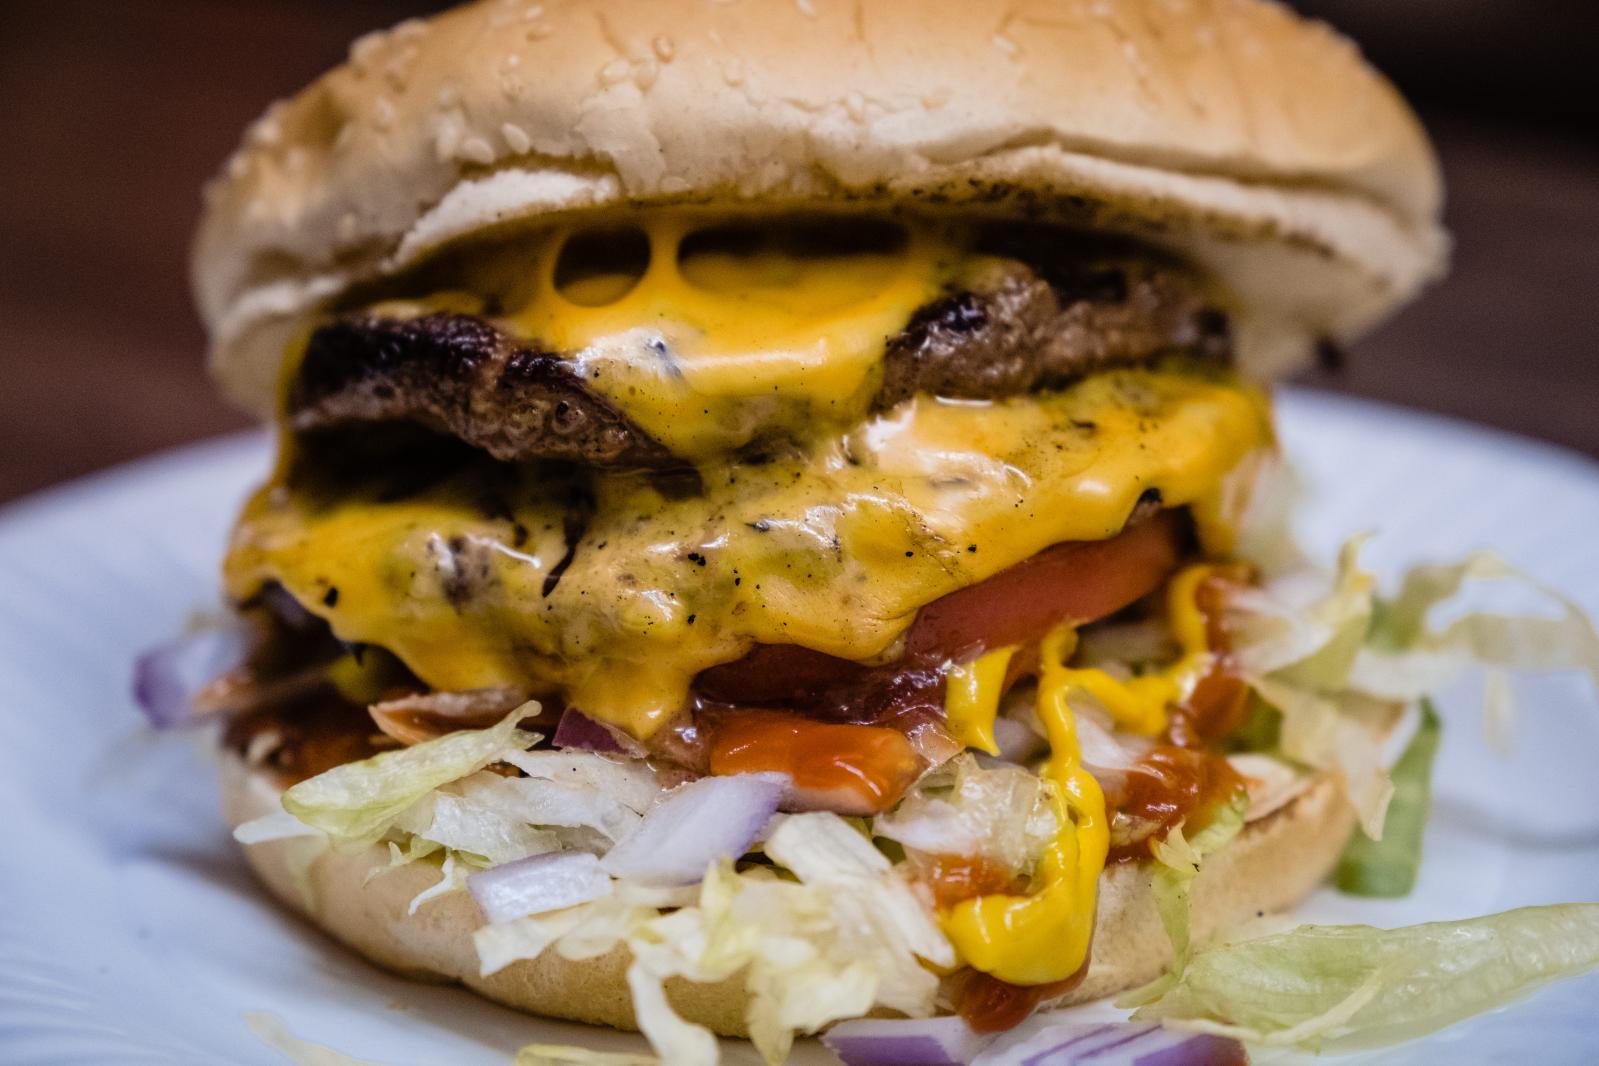 Image from FOOD/DRINK - A double cheeseburger is seen at Sam’s Burgers in...